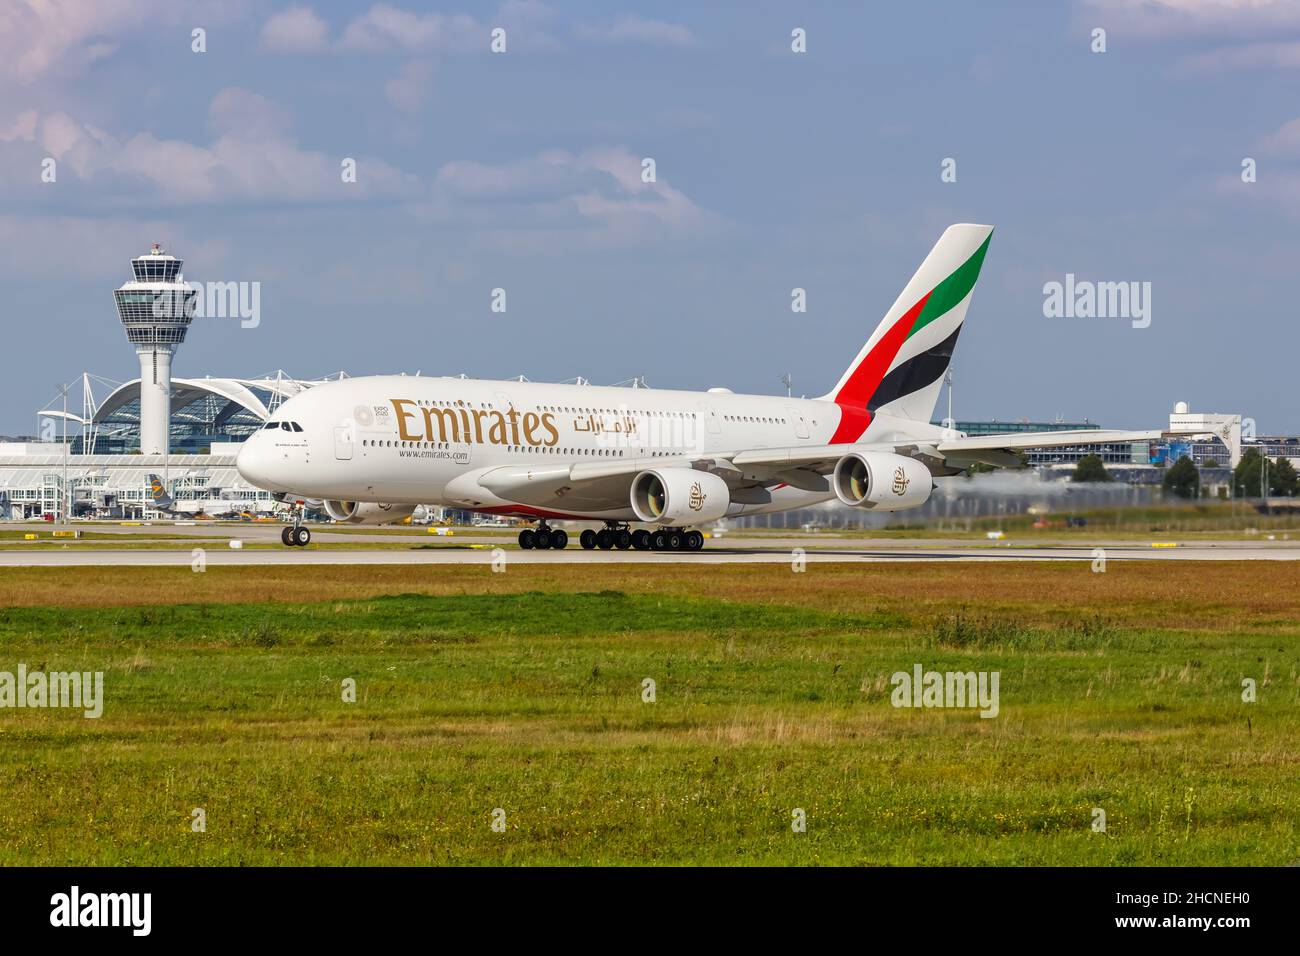 Munich, Germany - September 9, 2021: Emirates Airbus A380-800 airplane at Munich airport (MUC) in Germany. Stock Photo